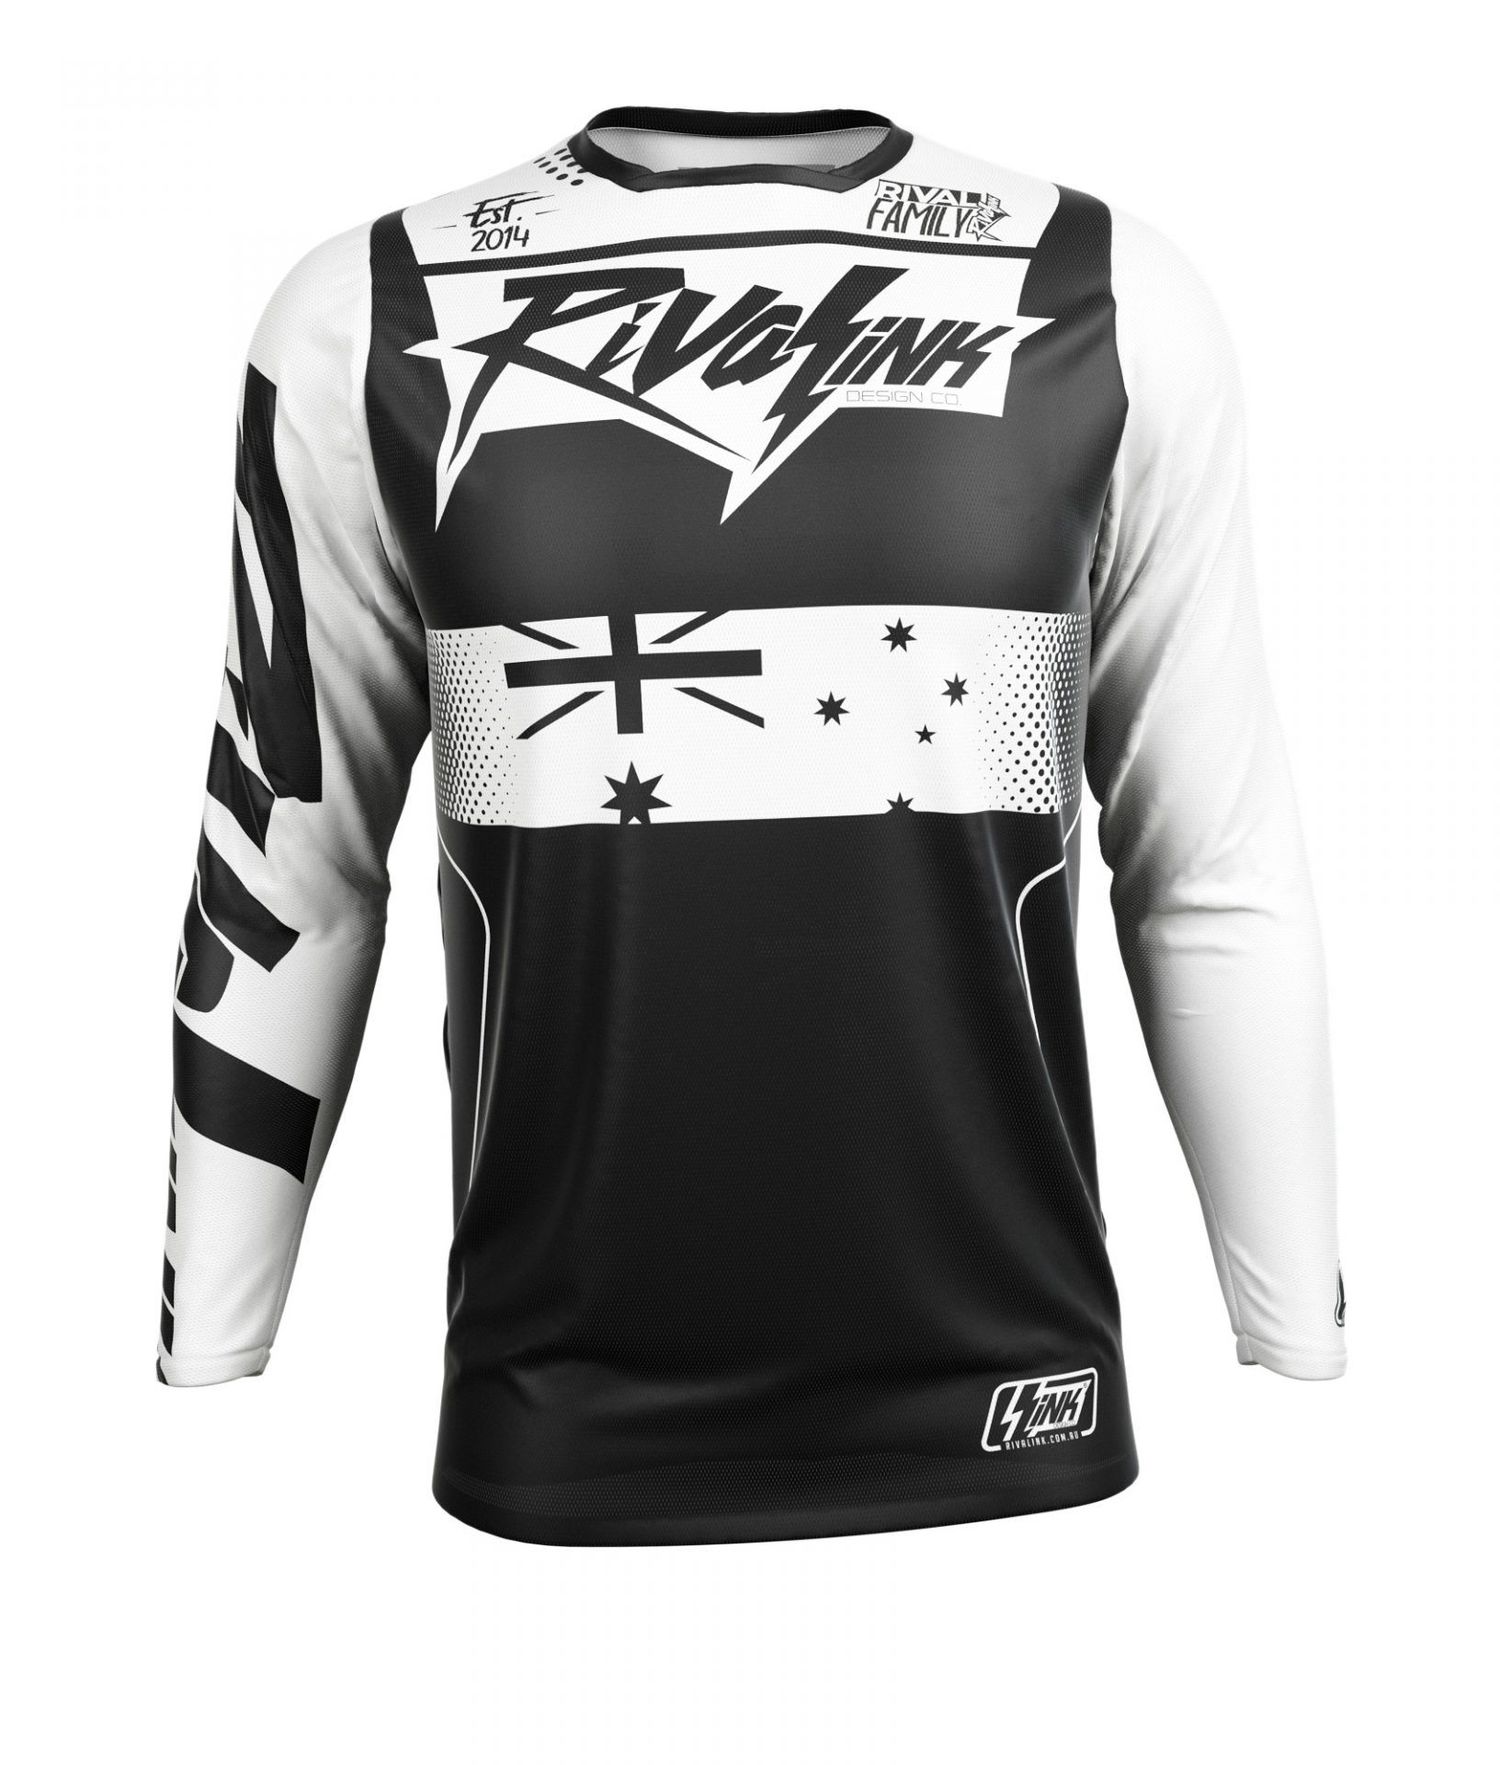 PREMIUM FIT CUSTOM SUBLIMATED JERSEY – HERITAGE BLACK AND WHITE – Rival ...